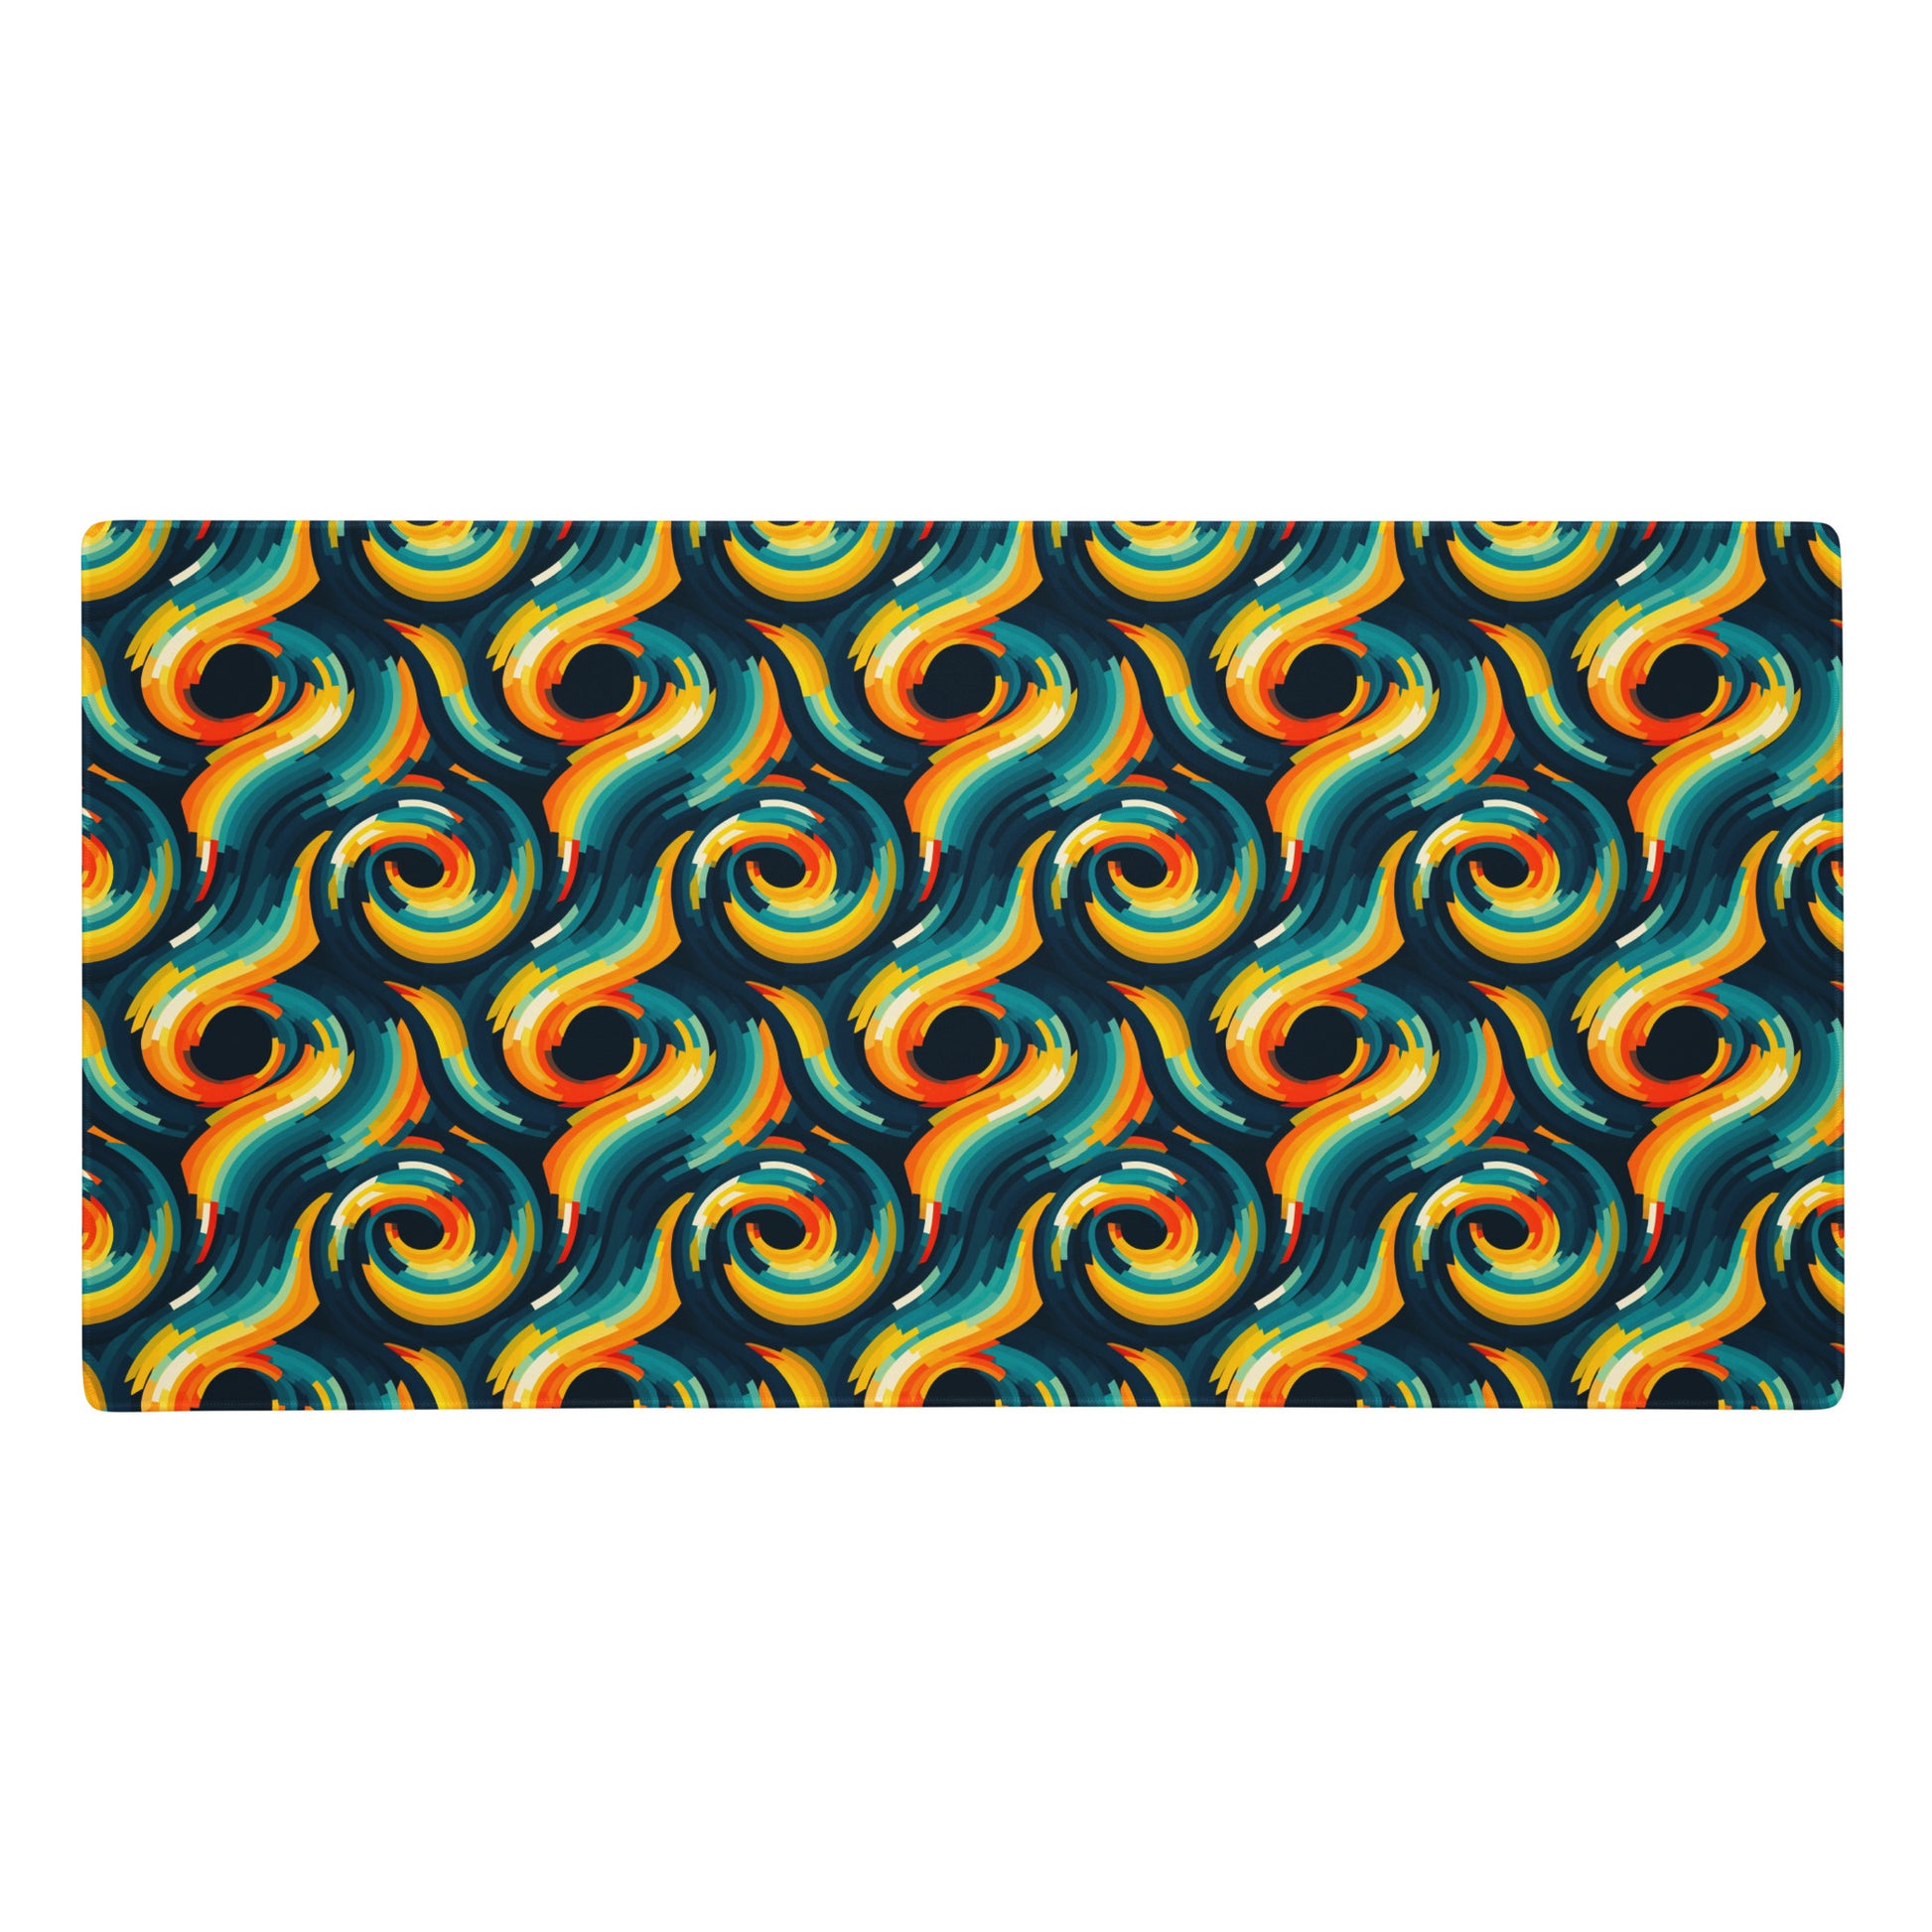  A 36" x 18" desk pad with swirls all over it. Yellow and Blue in color.